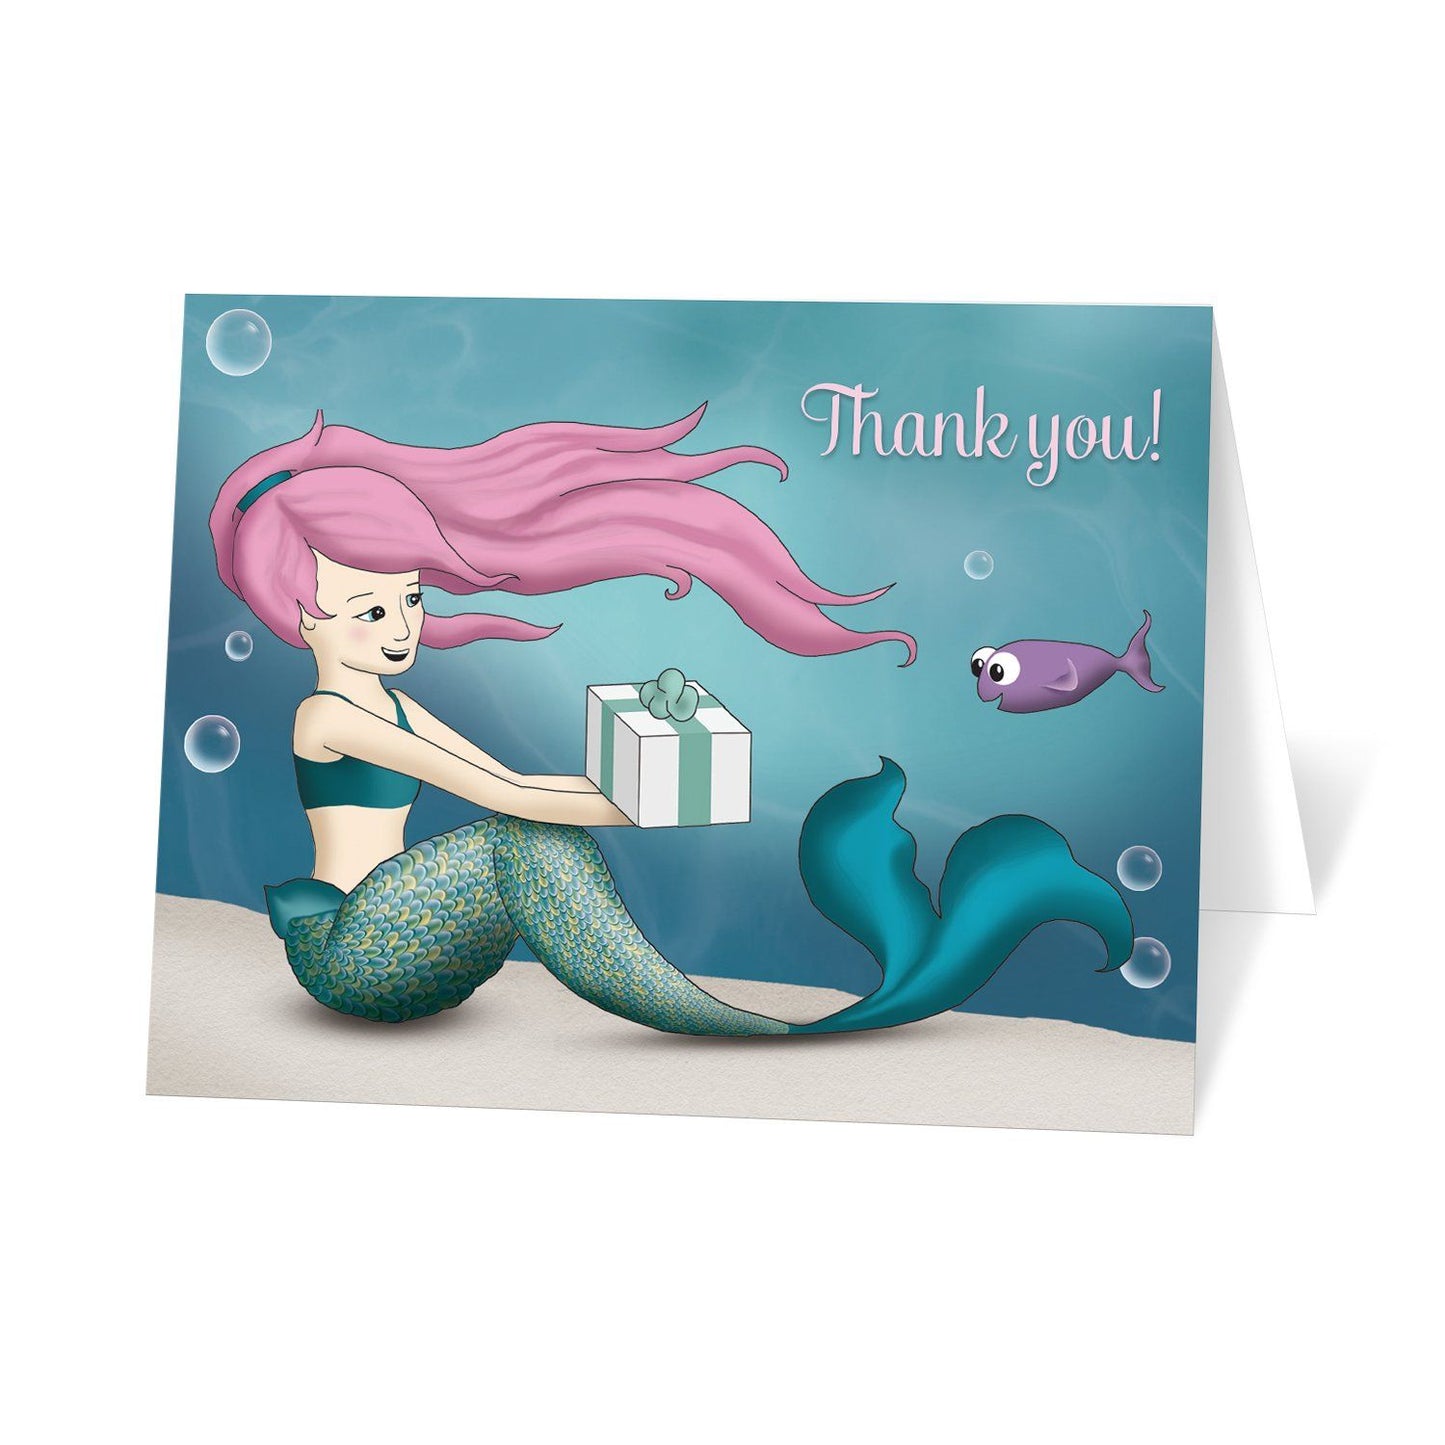 Under the Sea Mermaid Thank You Cards at Artistically Invited. Uniquely illustrated under the sea mermaid thank you cards with an under the sea theme. They are designed with a mermaid with pink hair exchanging a gift with a happy little purple fish. This underwater illustration is has an aqua blue water background. It's sprinkled with some whimsical bubbles to add some fun to the design. "Thank you!" is printed in a light pink script font in the corner over the water.